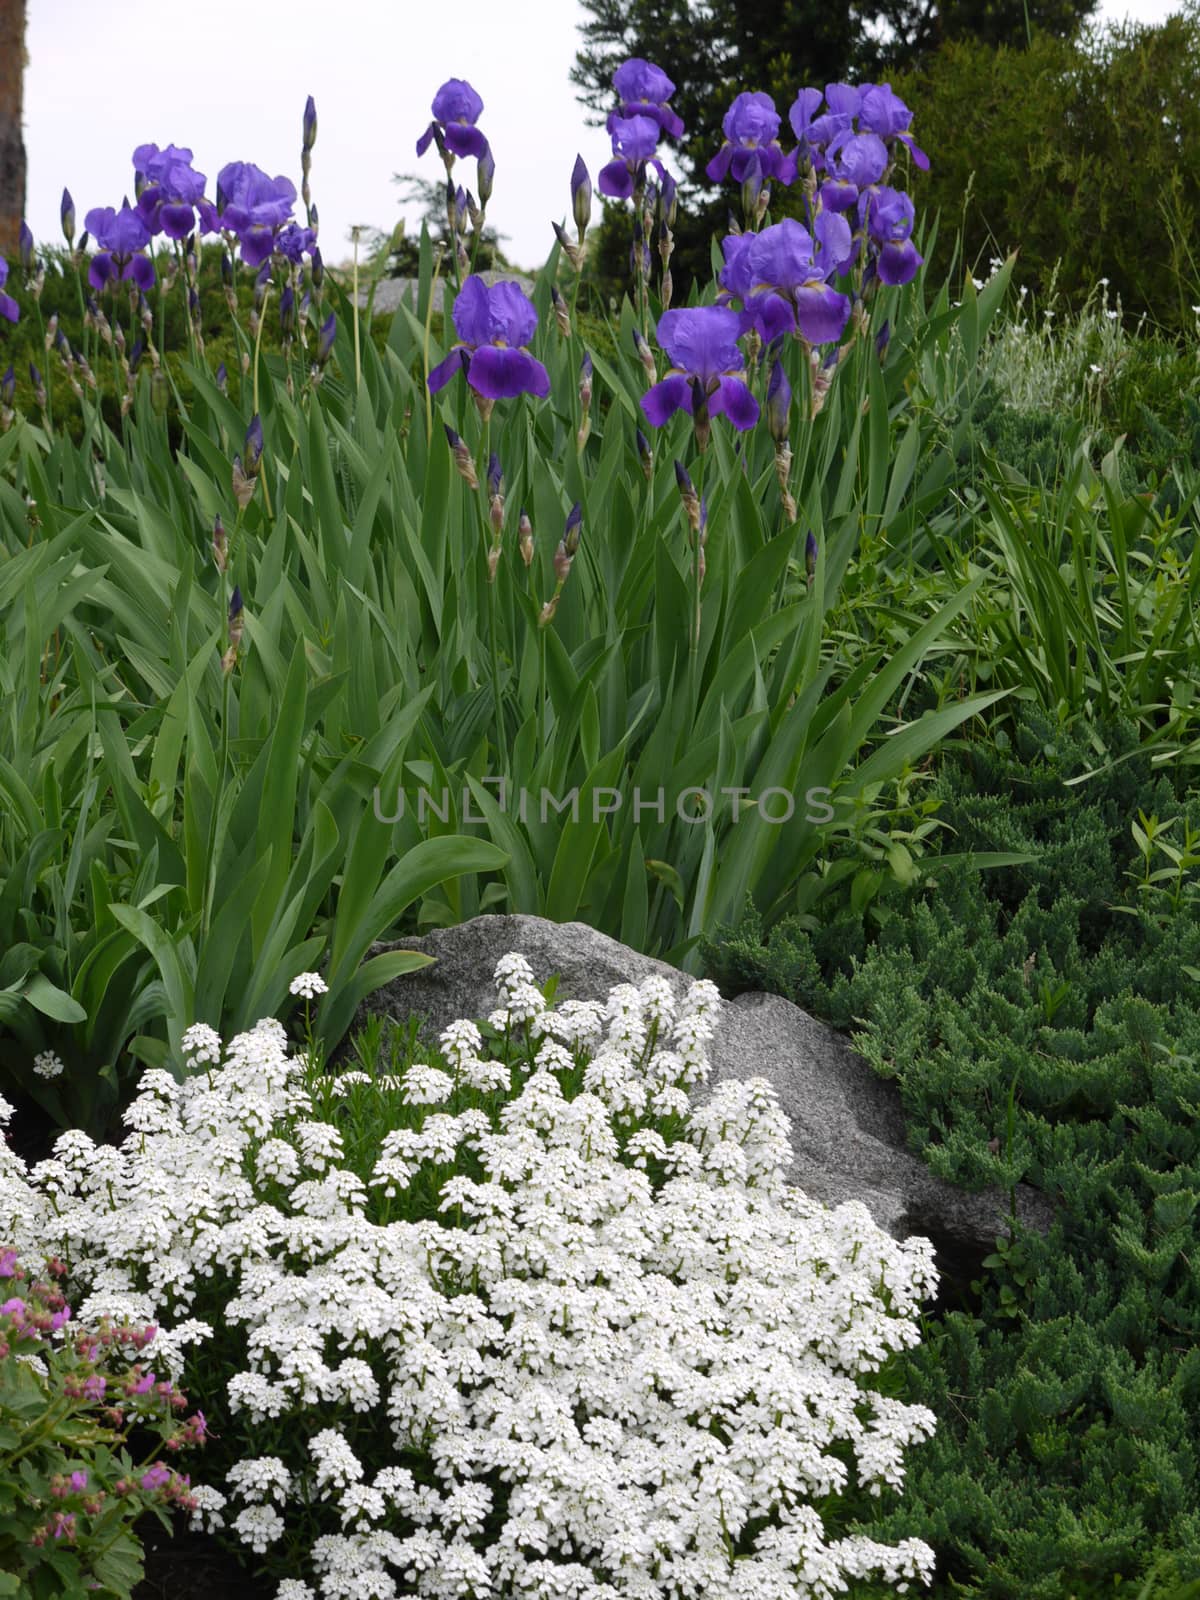 blue violet irises and small white flowers growing next to a tree in the background